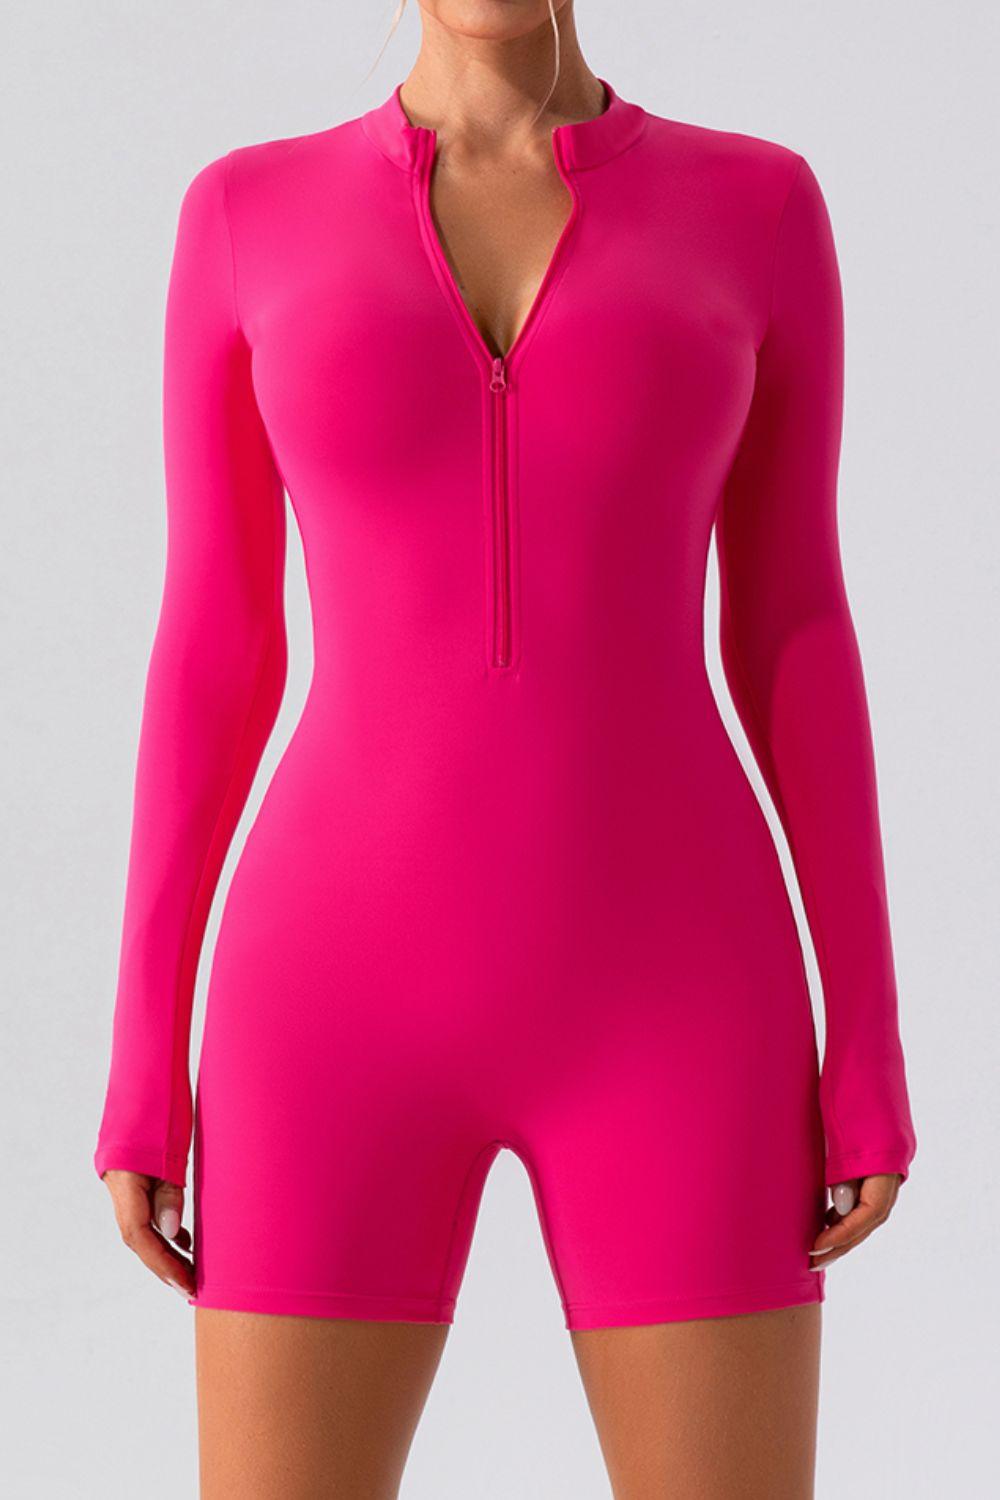 a woman in a bright pink bodysuit